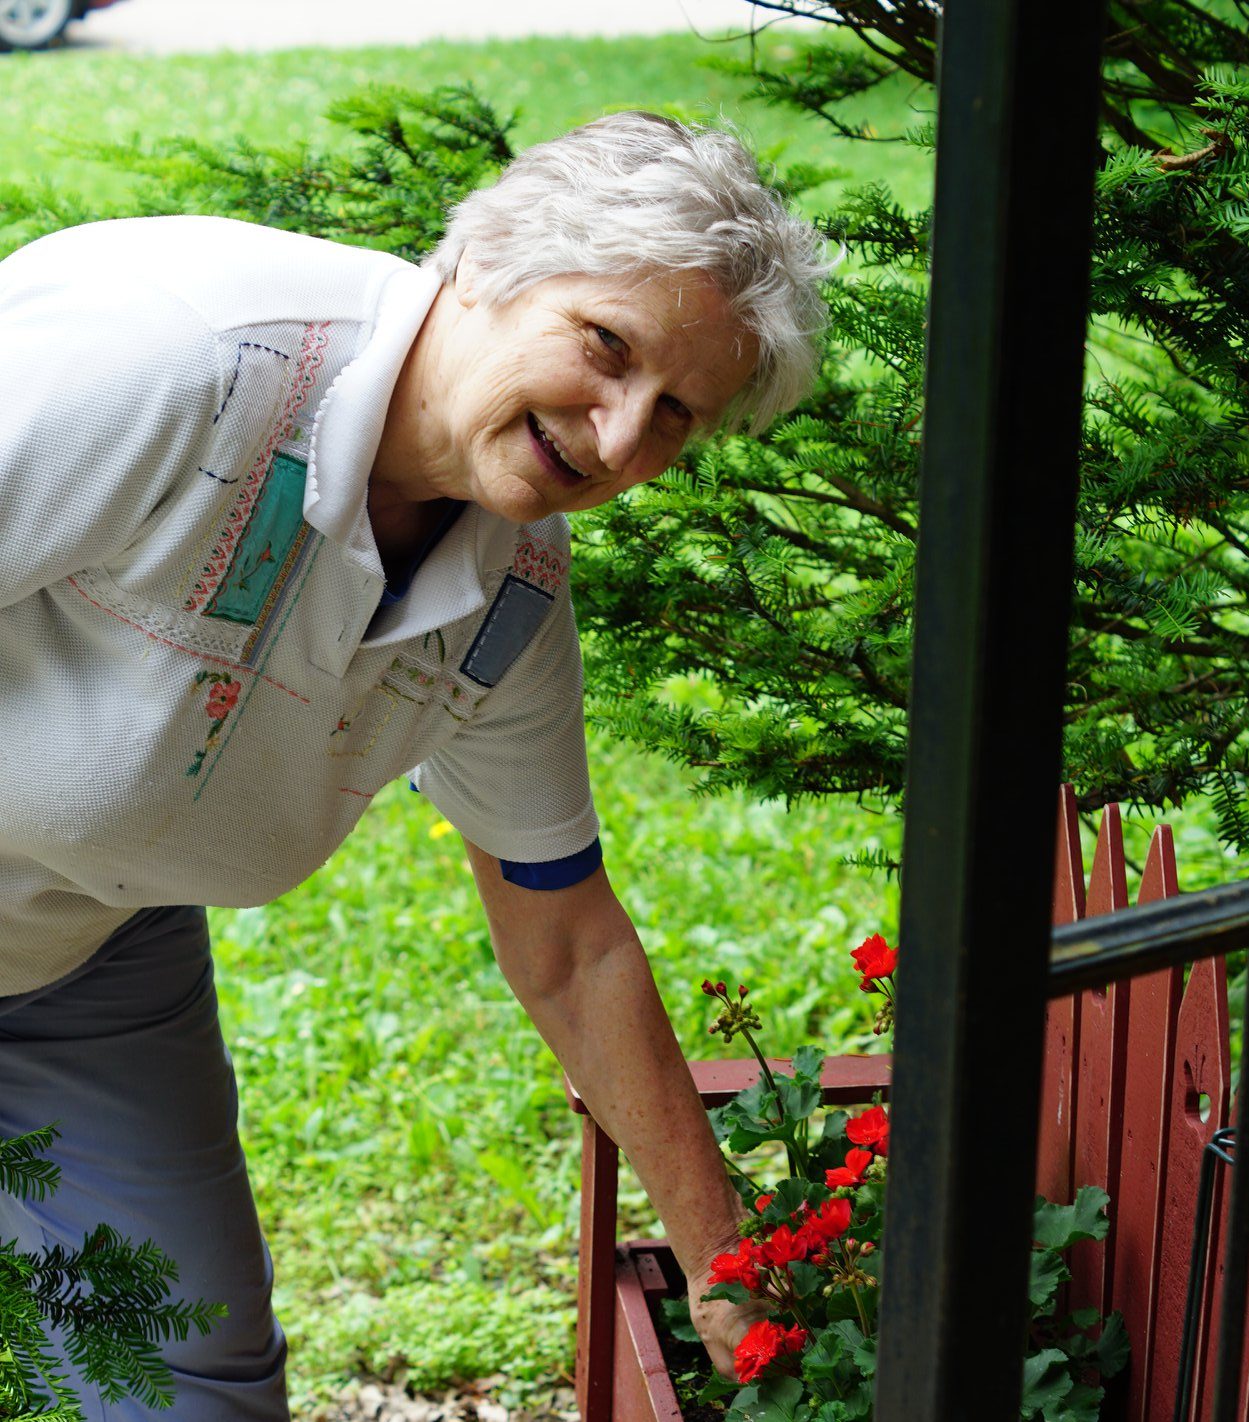 Mary Ann Ihm, a gray haired white woman, smiles at the camera while showering off her flowers outdoors